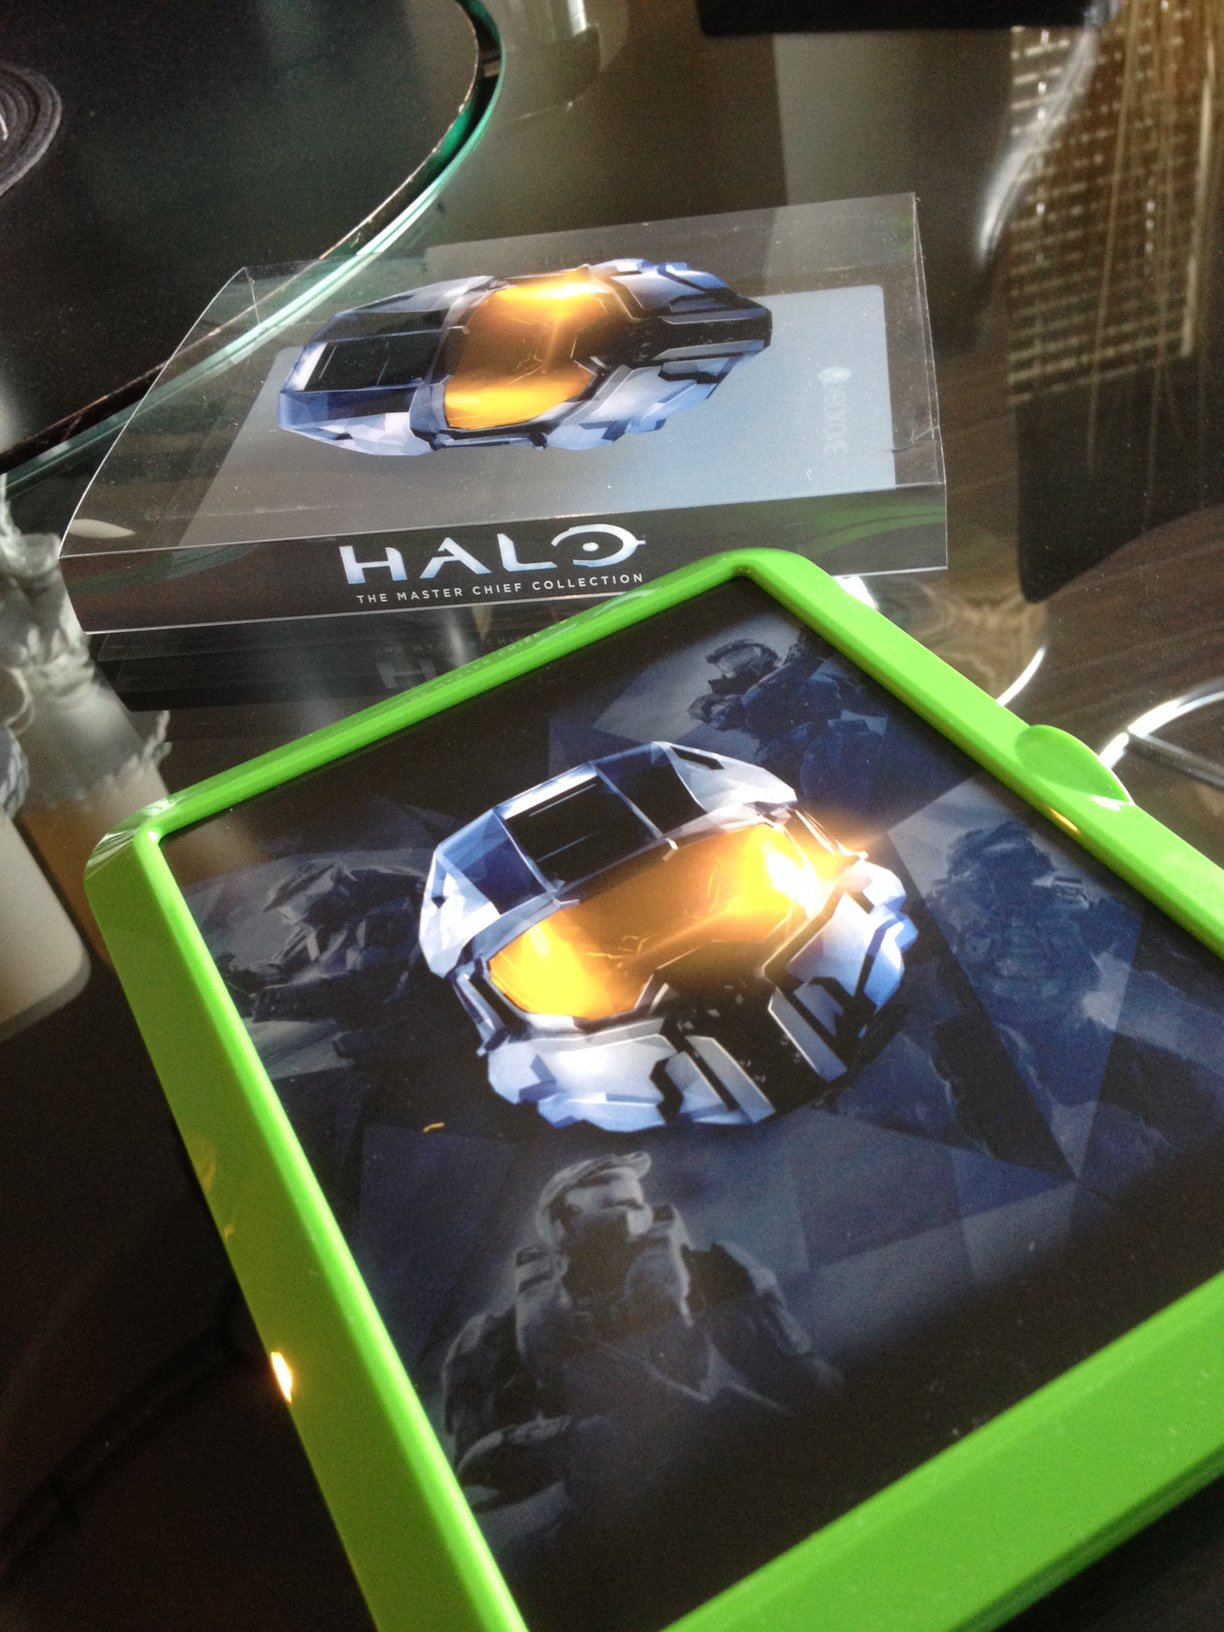 halo master chief collection eb games